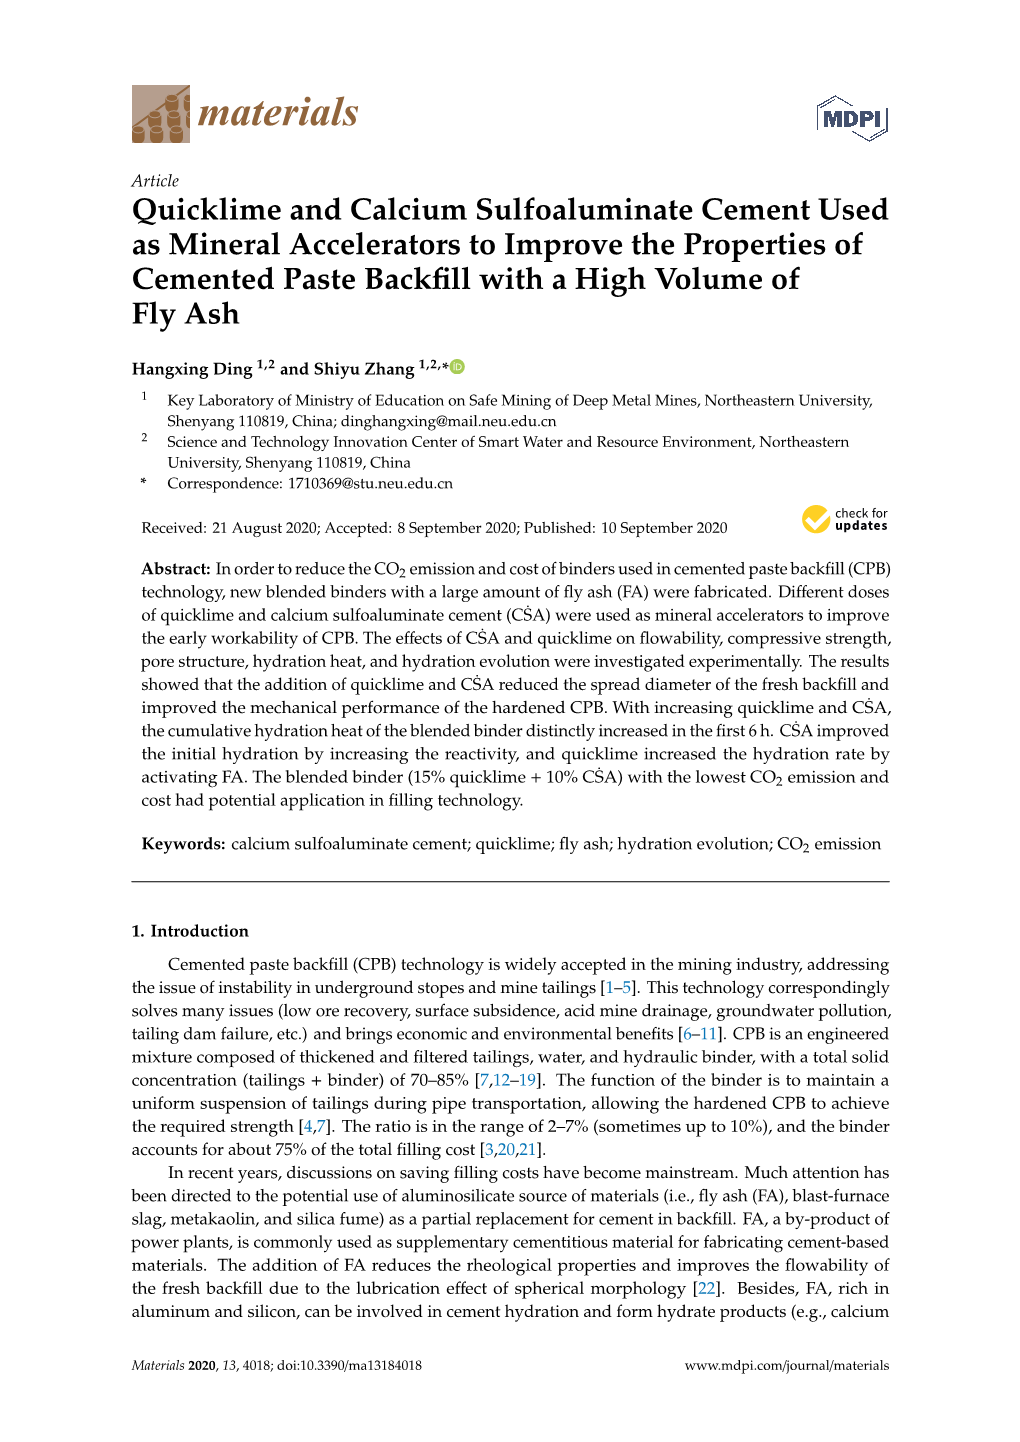 Quicklime and Calcium Sulfoaluminate Cement Used As Mineral Accelerators to Improve the Properties of Cemented Paste Backﬁll with a High Volume of Fly Ash